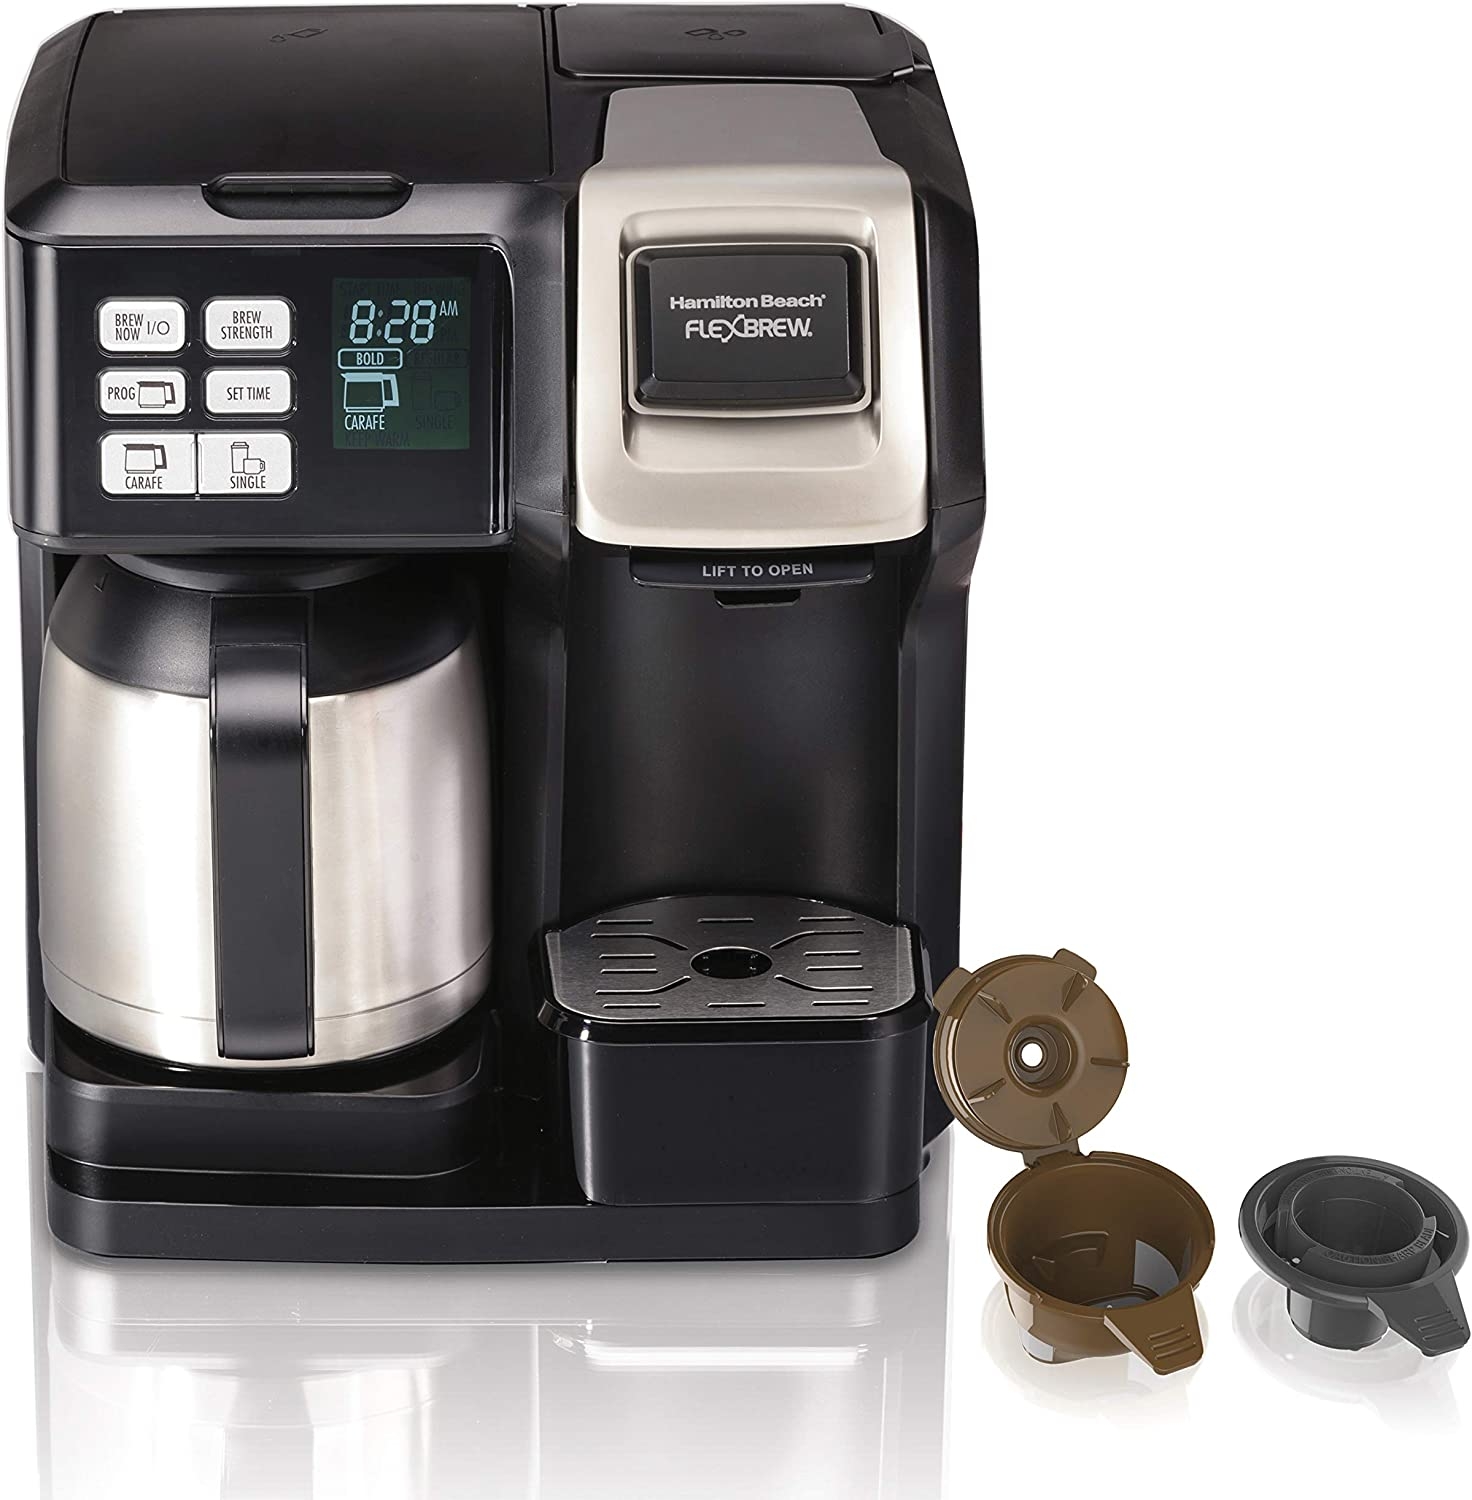 Hamilton Beach FlexBrew Trio 2-Way Coffee Maker, Compatible with K-Cup Pods or Grounds, Combo, Single Serve & Full 10c Thermal